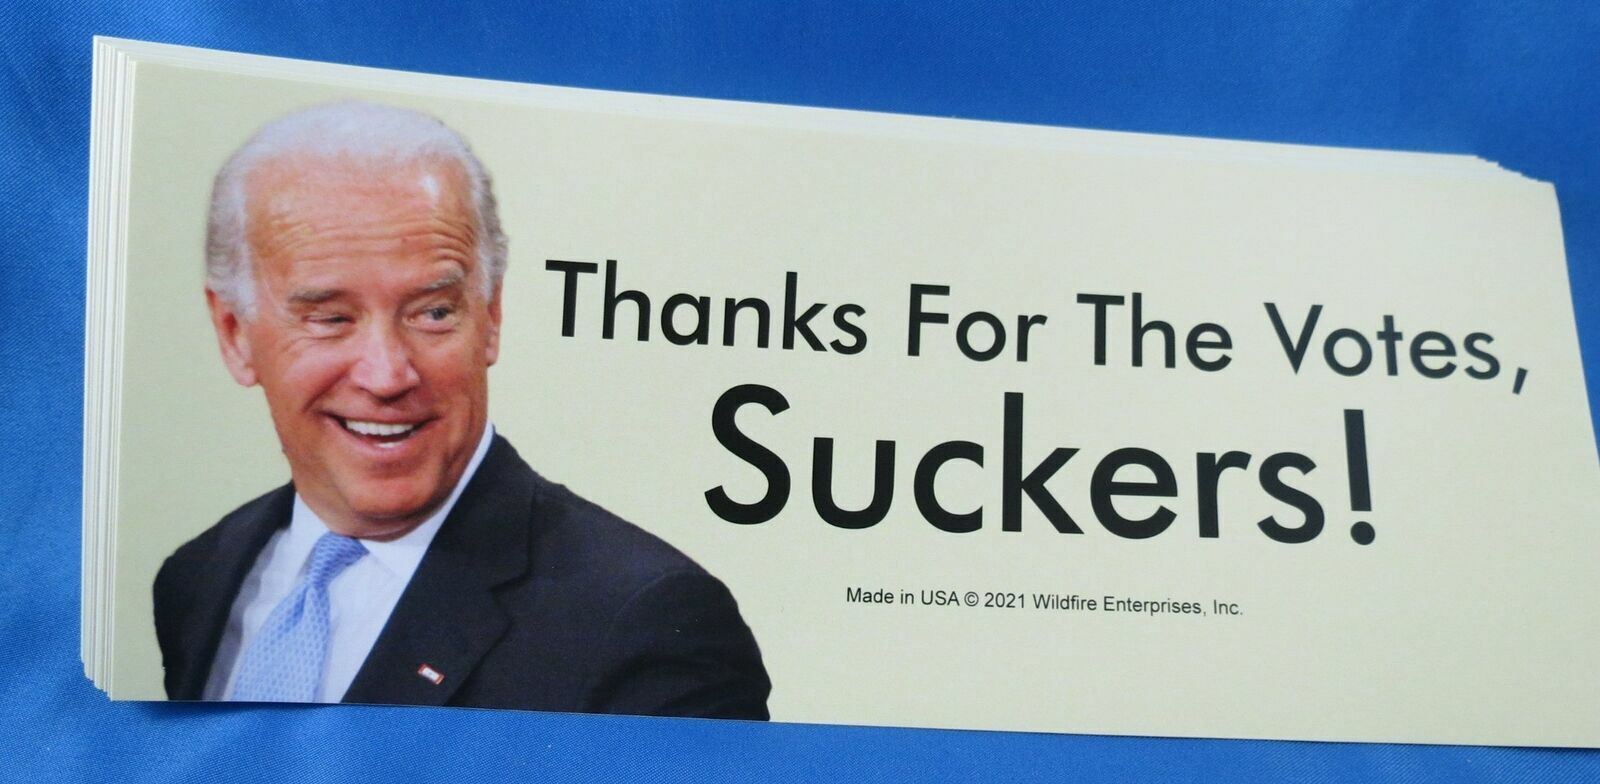 WHOLESALE LOT OF 10 BIDEN THANKS FOR THE VOTES SUCKERS STICKERS Trump 2024